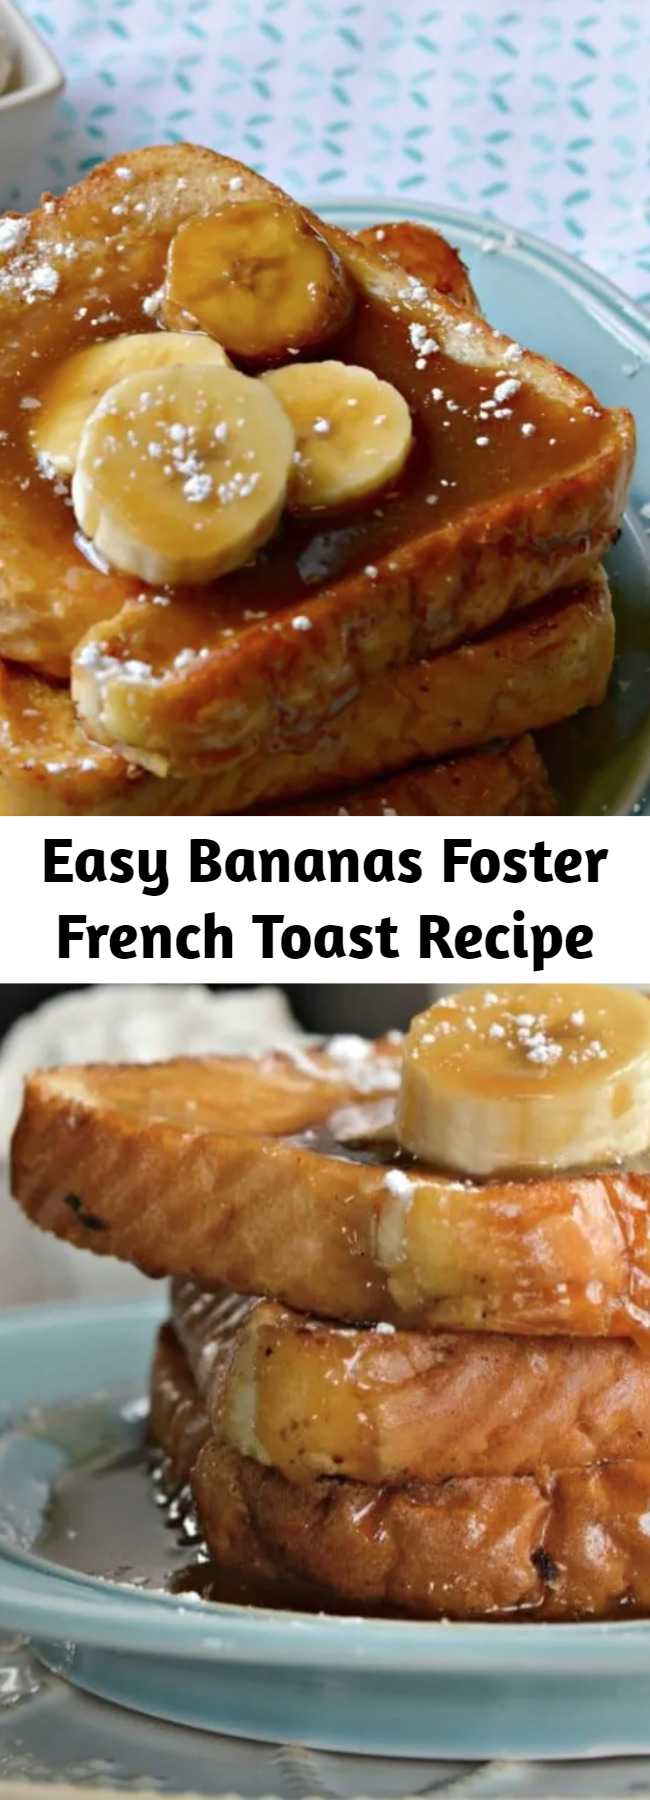 Easy Bananas Foster French Toast Recipe - Bananas Foster French Toast is a perfect recipe for any occasion. The flavors are unbeatable and everyone will love it.